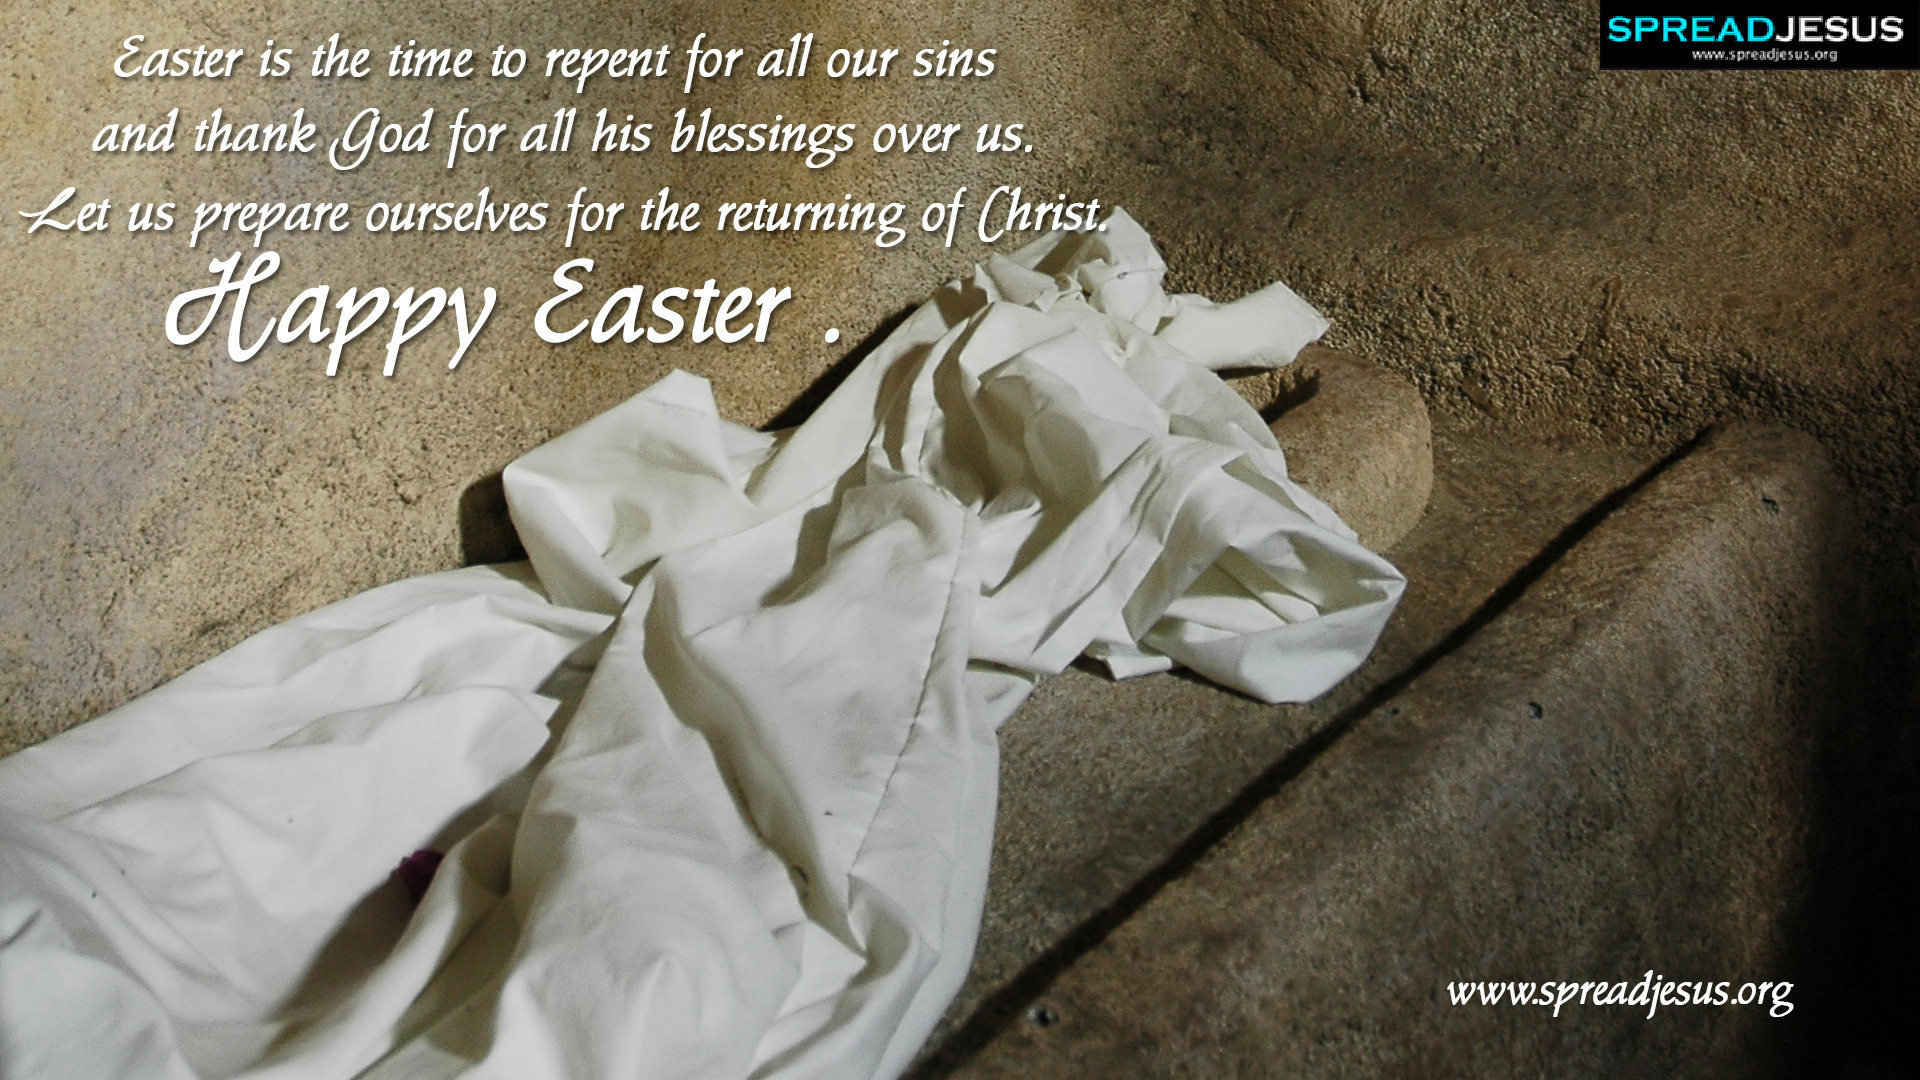 Easter Quotes HD Wallpapers Easter is the time to repent for all our sins